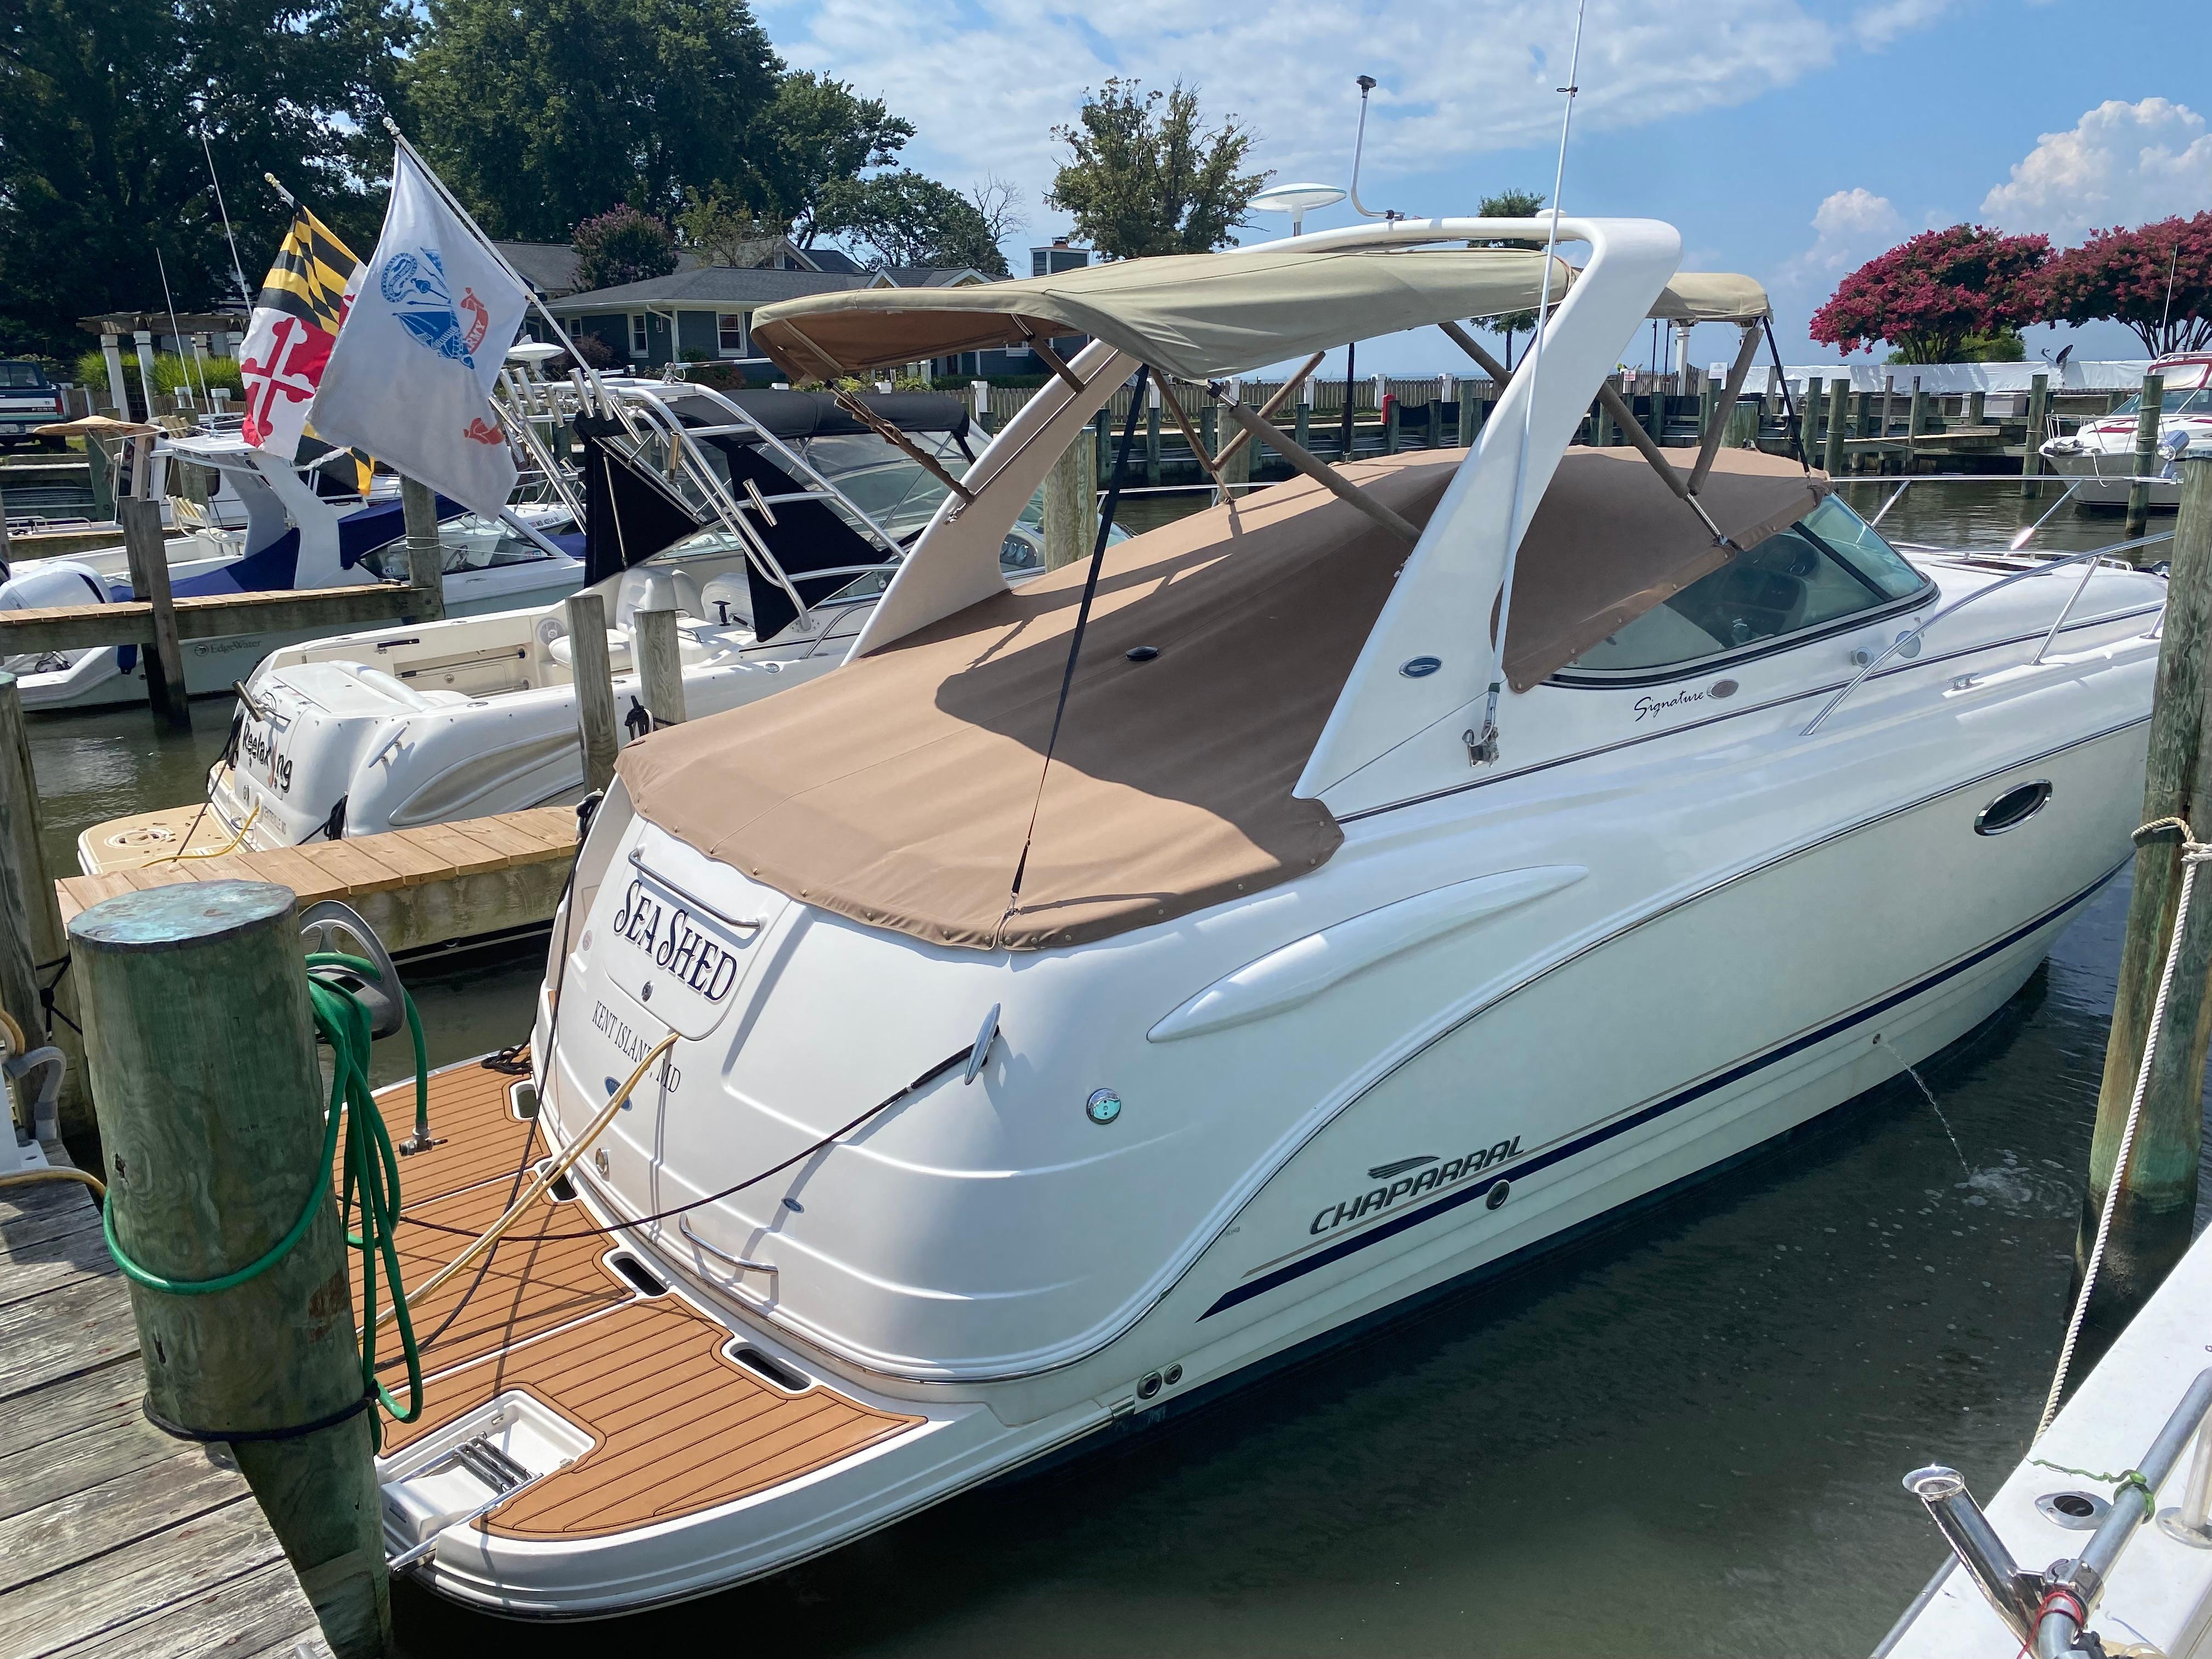 Whisper II Yacht Brokers of Annapolis